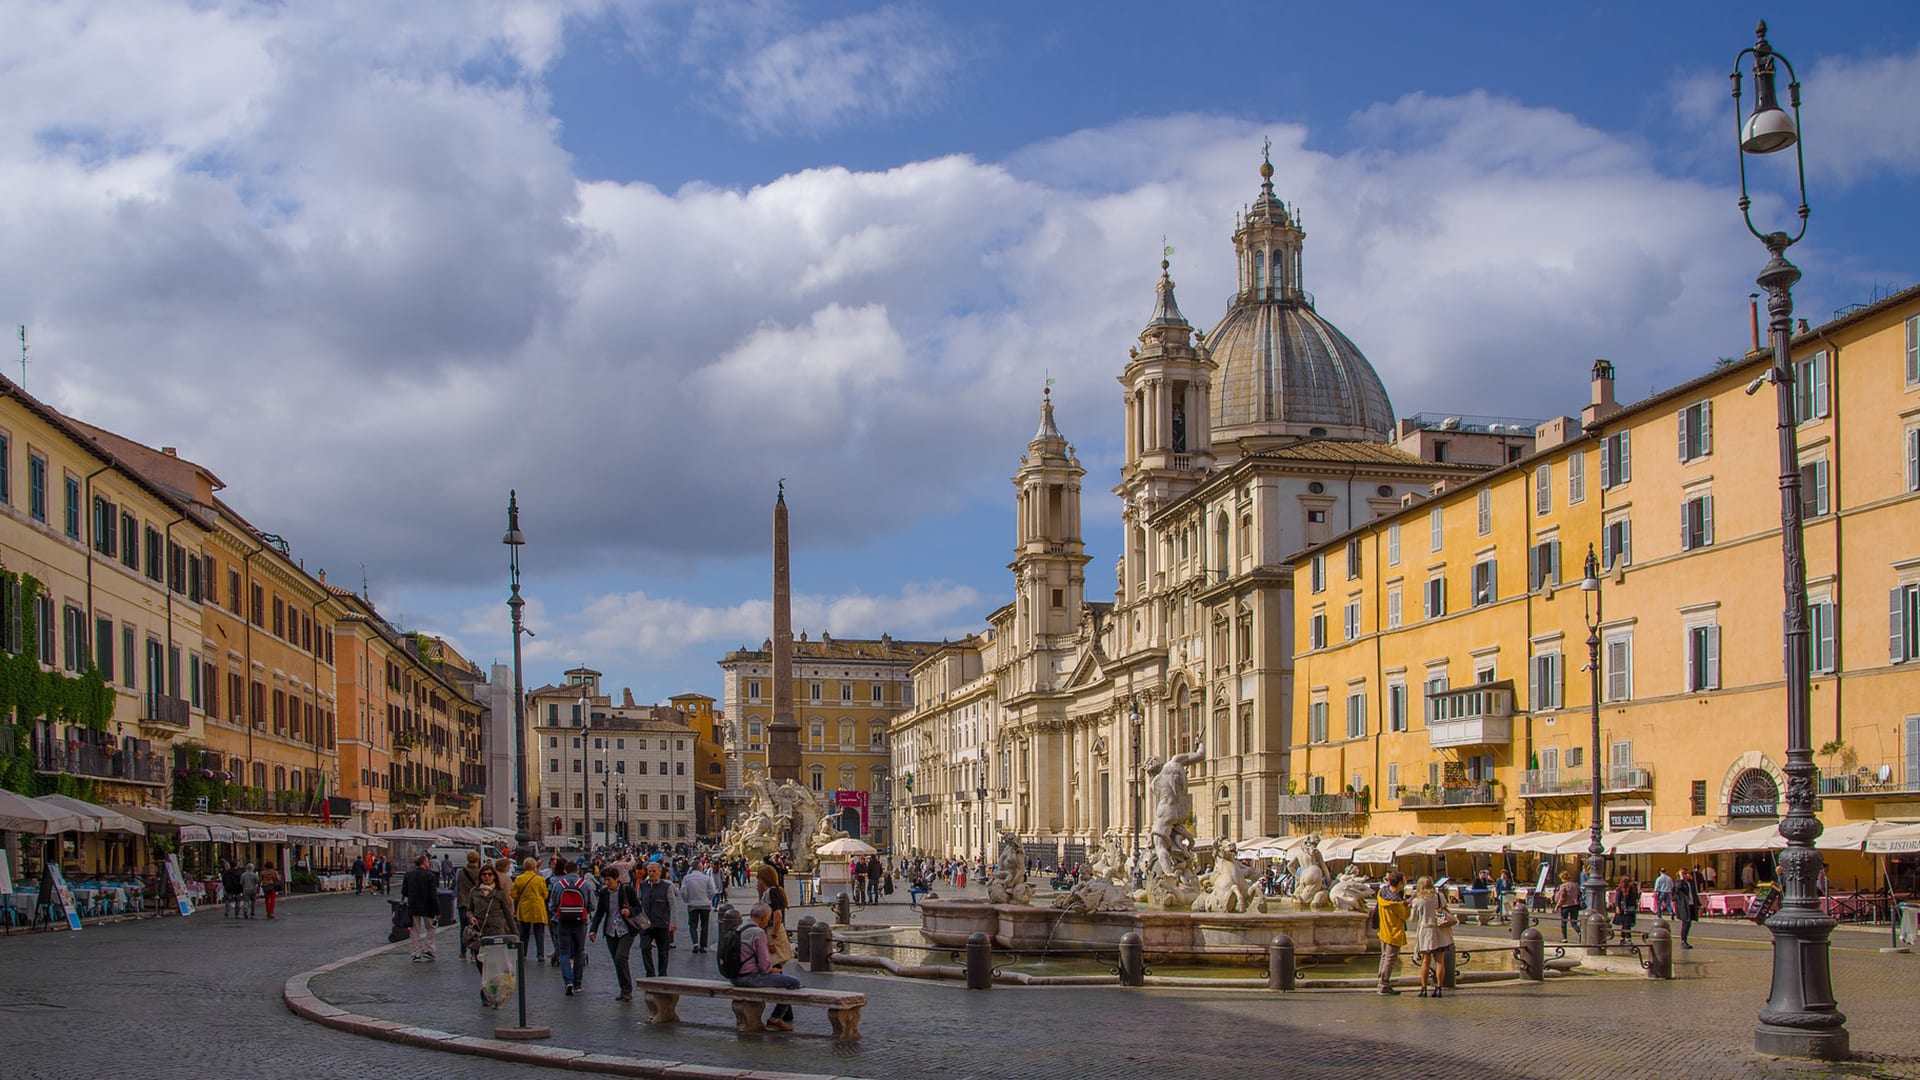 which churches to visit in rome